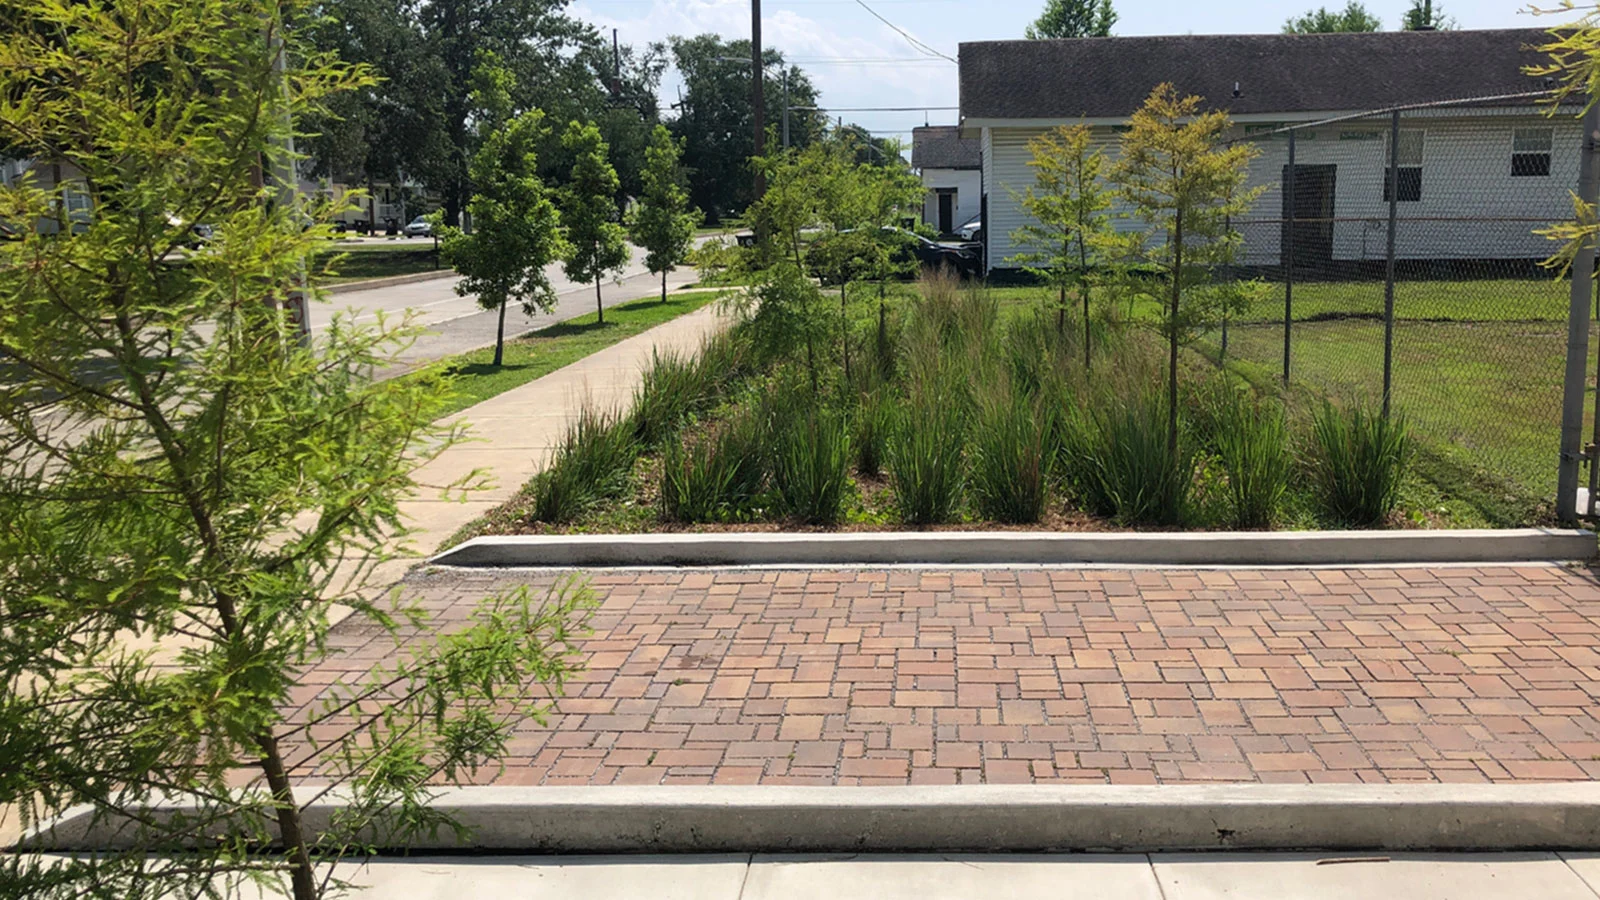 Umbrella-installed rain garden next to Stronger Hope Baptist Church in the Hoffman Triangle built to reduce localized flooding.